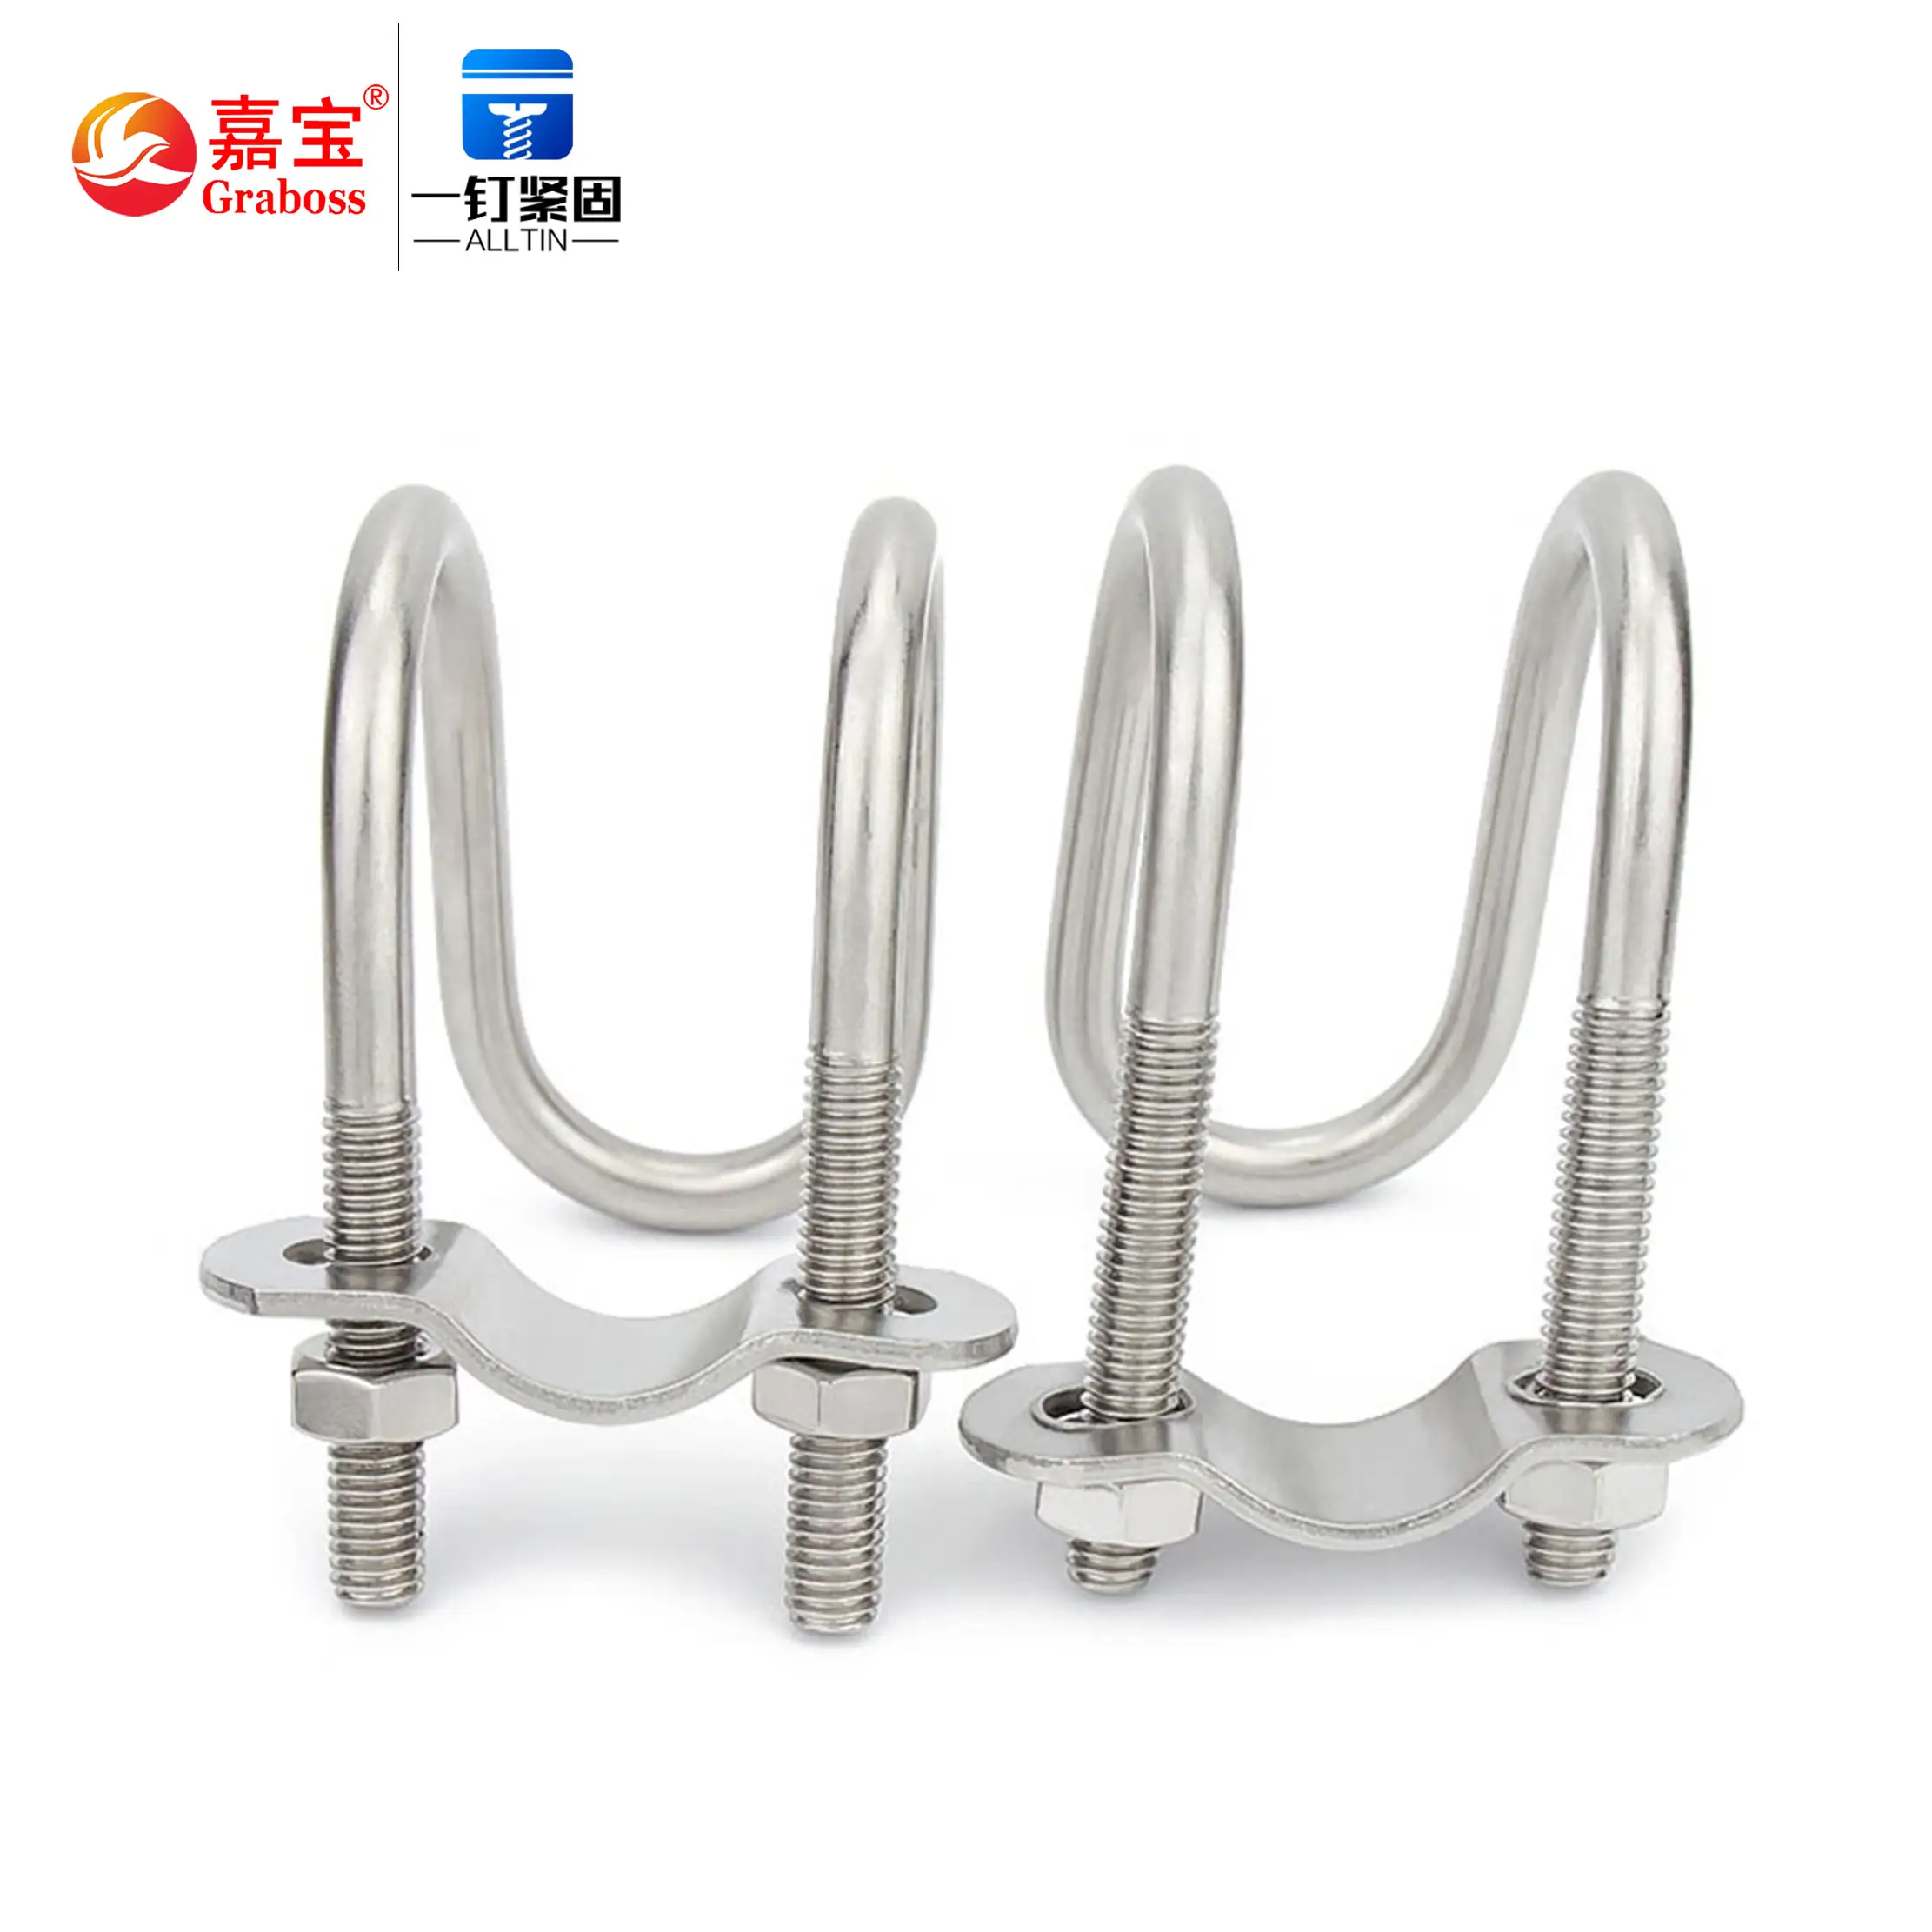 Customize various sizes 304/316 Stainless Steel Pipe Clamp Flat U Bolt Bending Nut Washer Truck U Bolt M6-M8